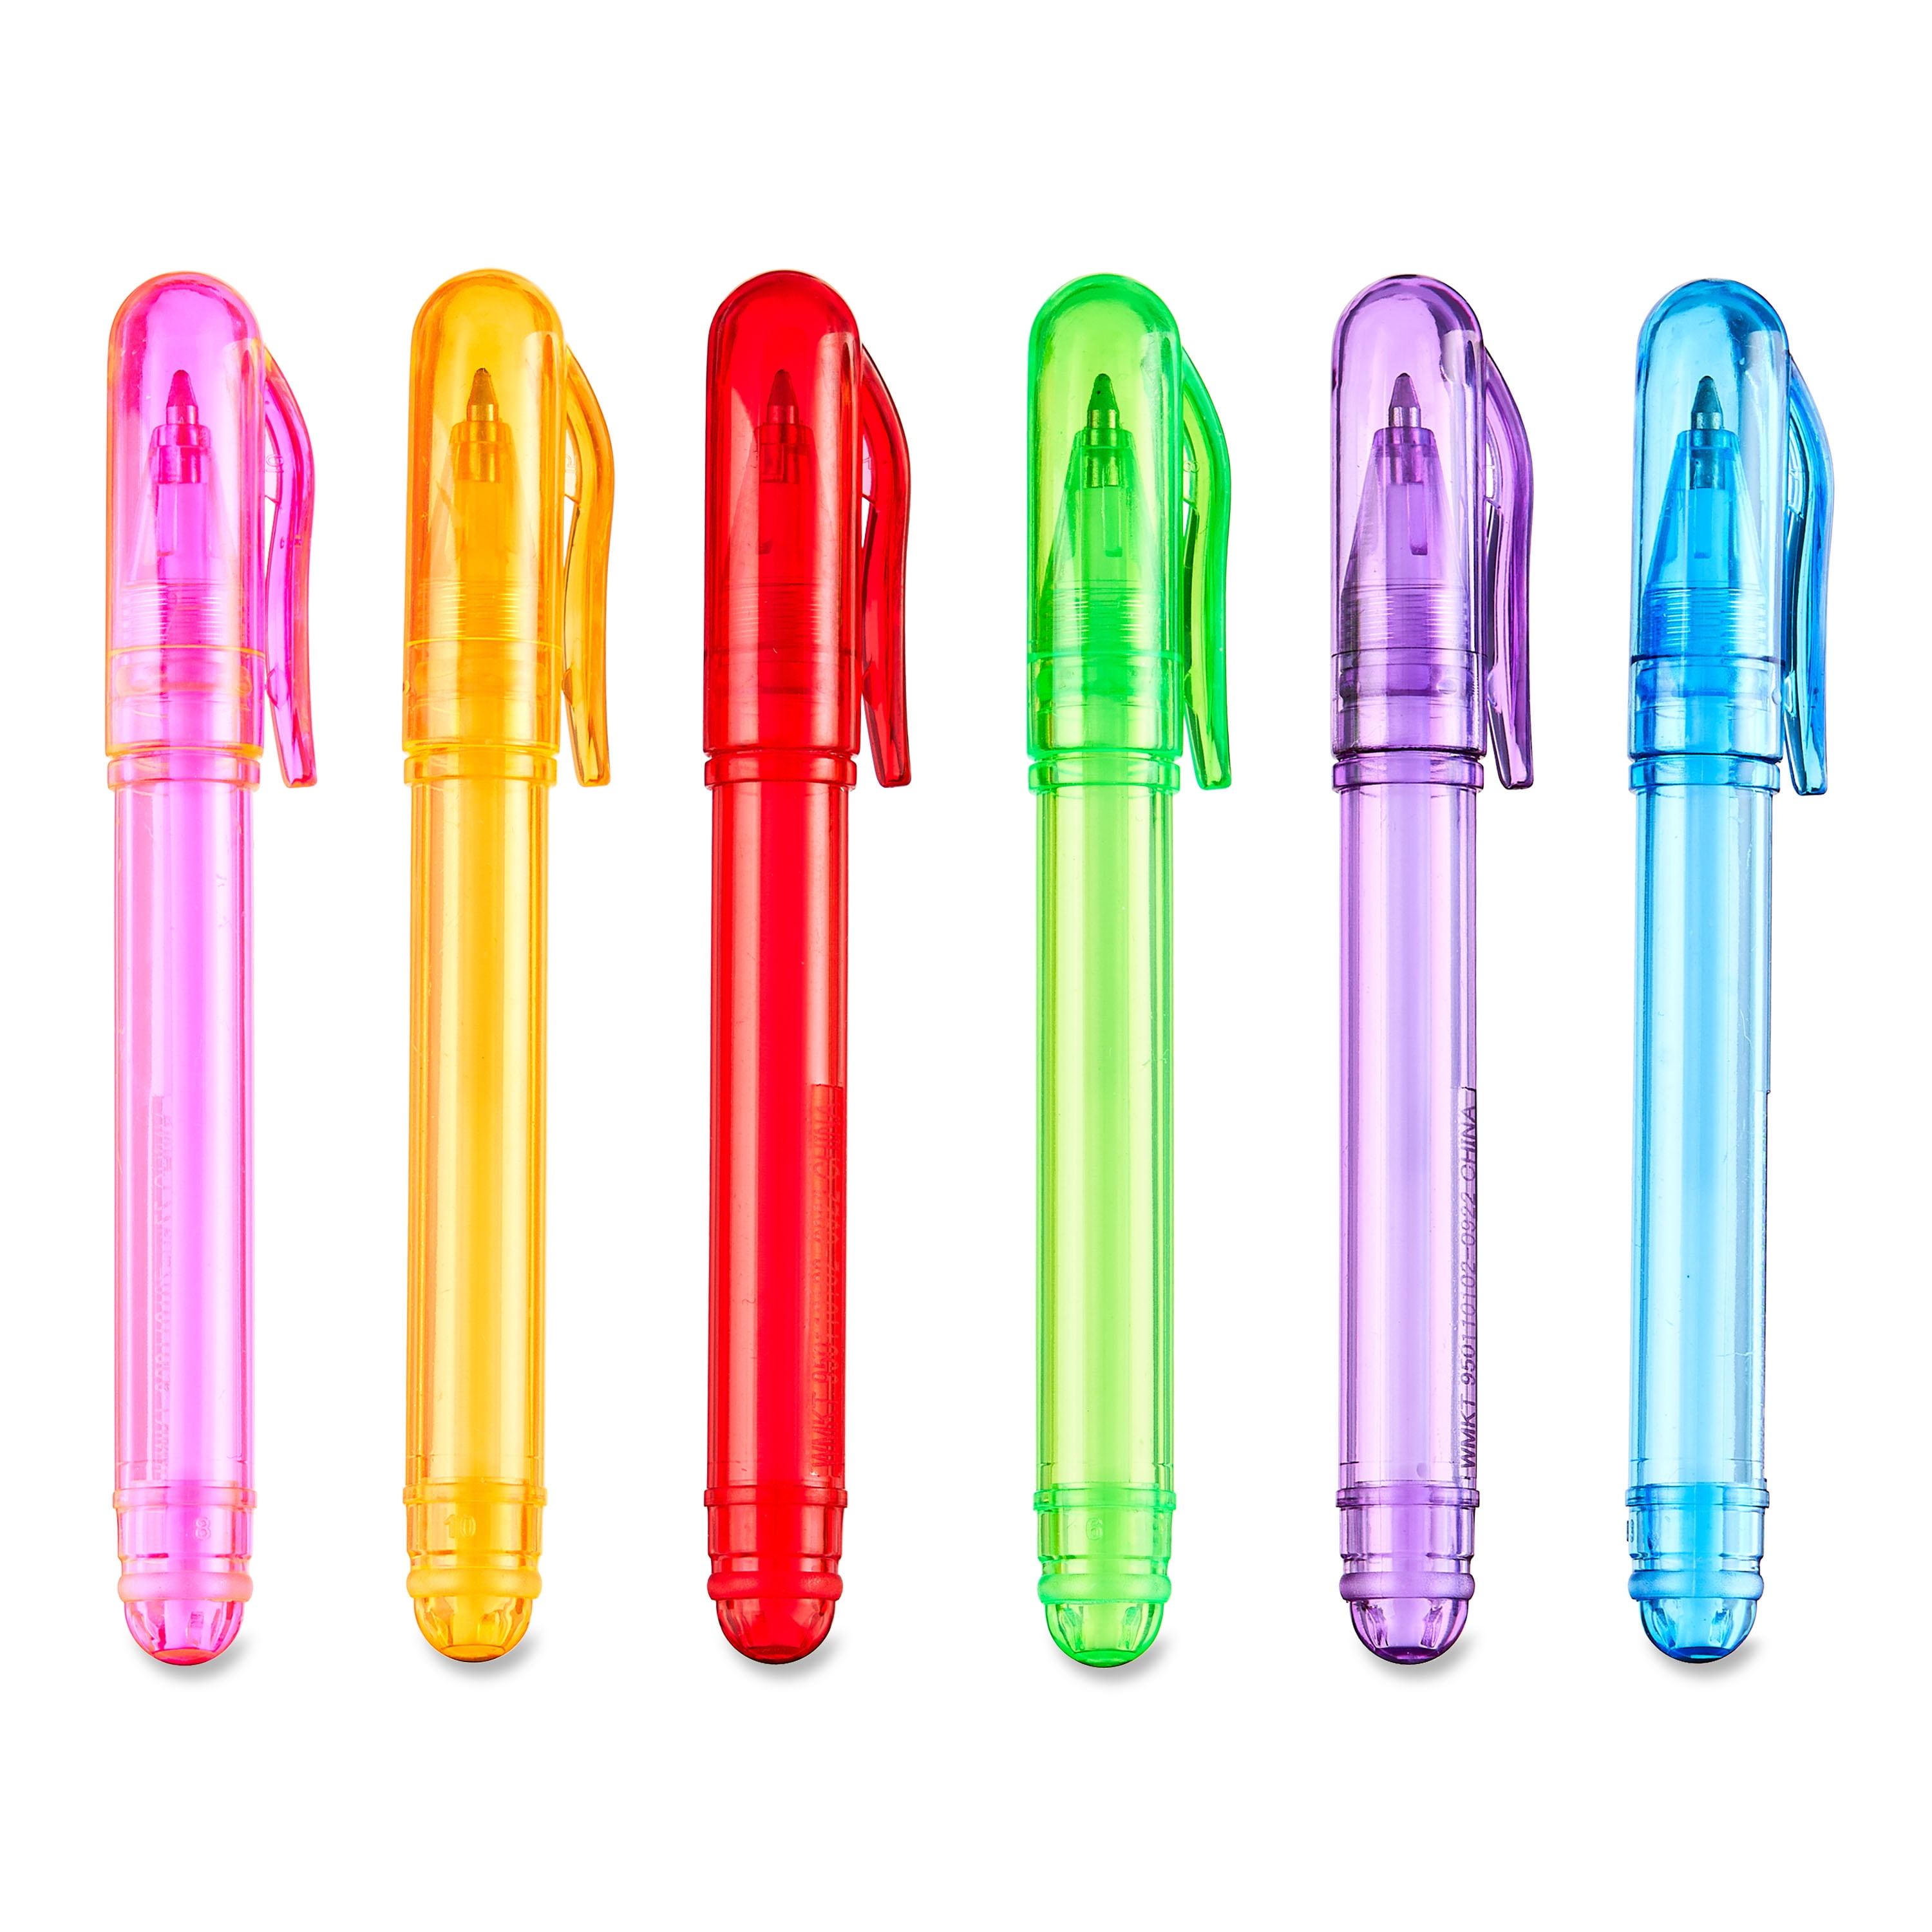 WAY TO CELEBRATE! Way To Celebrate Rainbow Mini Pen, Multi Colors, Plastic, Party Favors, 12 Counts, Valentine's Day, Pens